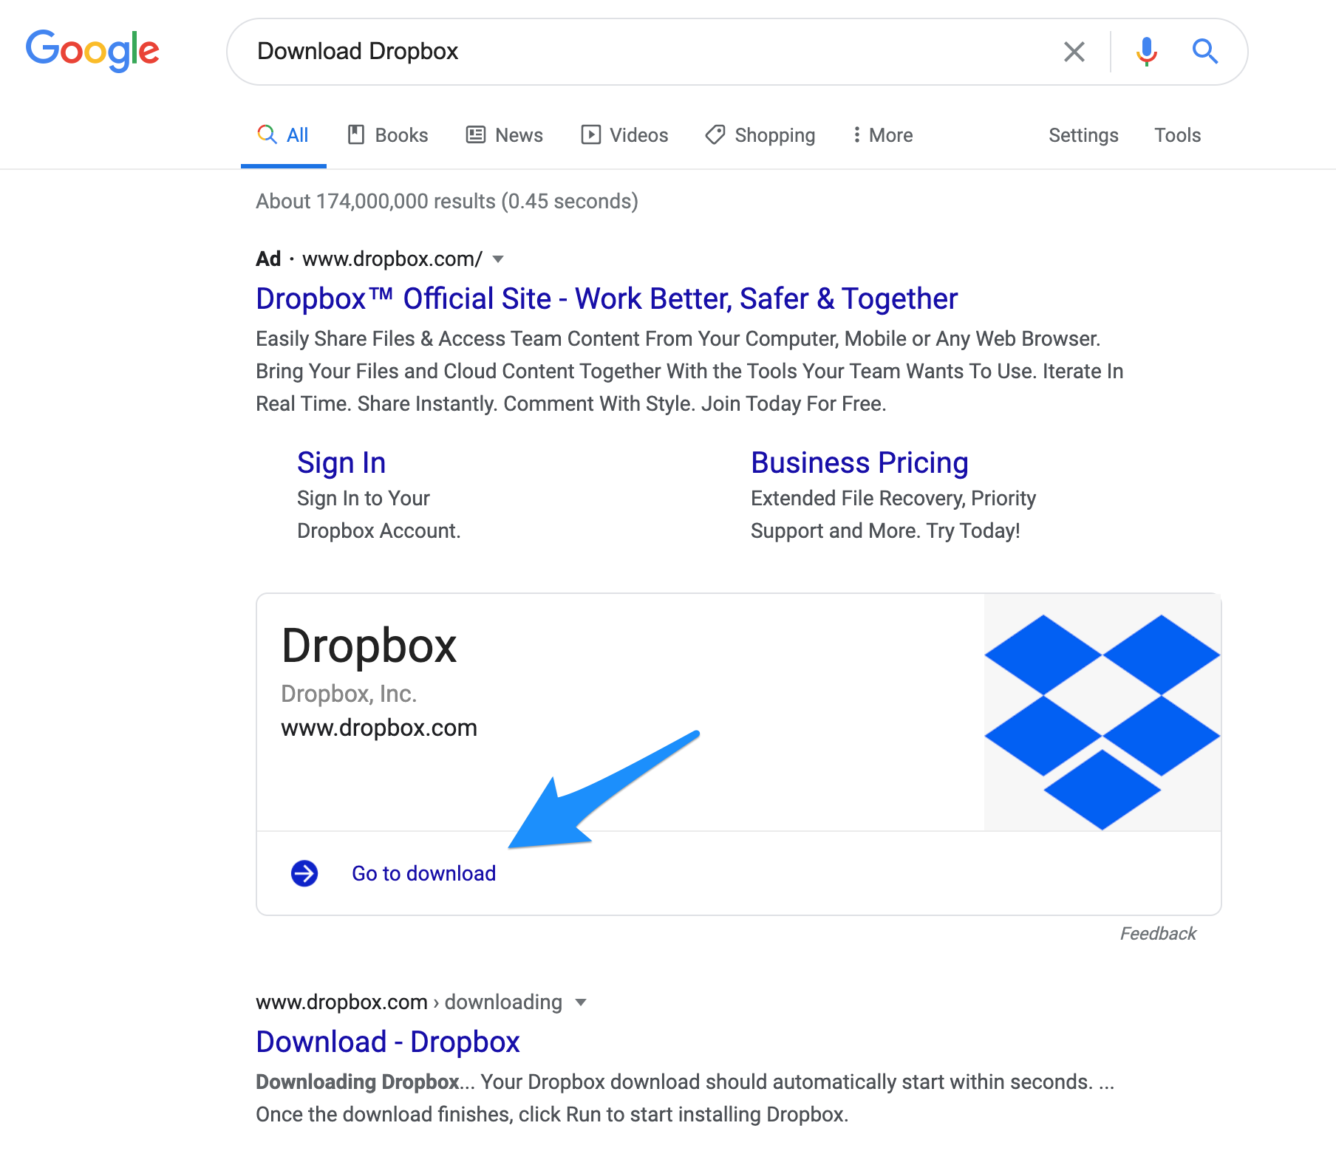 is dropbox secure enogh to store financial files